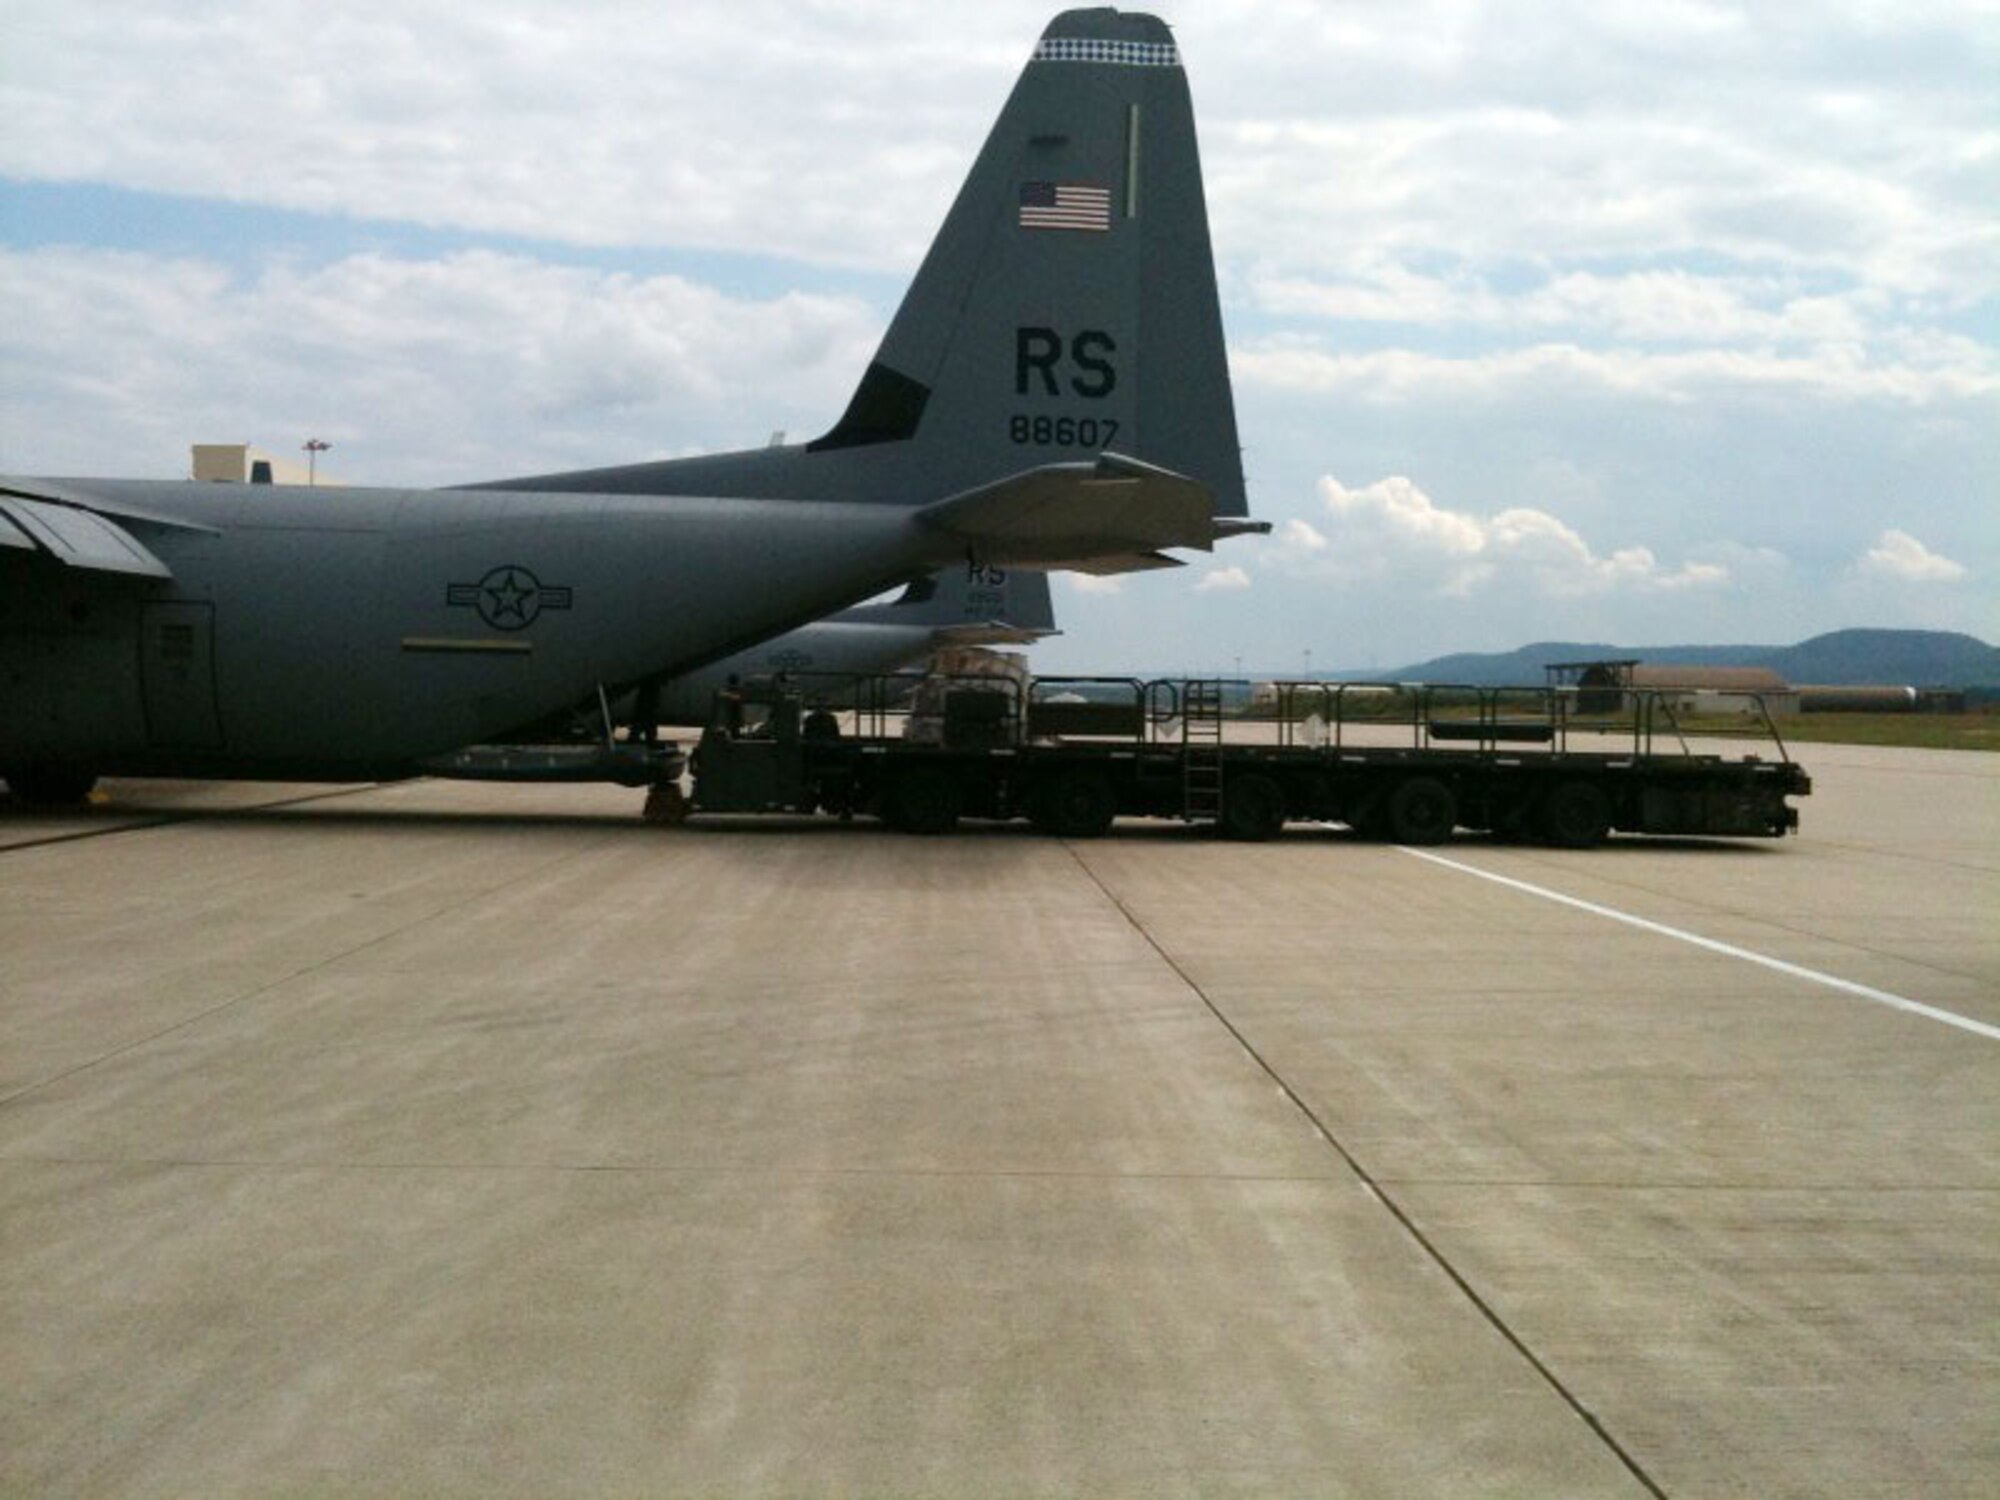 RAMSTEIN AIR BASE, Germany -- U.S. airmen load pallets of firefighting equipment onto a C-130J, bound for Russia, here Aug 13, 2010. The equipment is part of a joint U.S. Air Forces Europe, U.S. Naval Forces Europe/Africa, Marine Forces Europe and U.S. Army Europe effort to assist the Russian government in fighting the wildfires in the country. (U.S. Air Force photo by Master Sgt. Keith Houin)